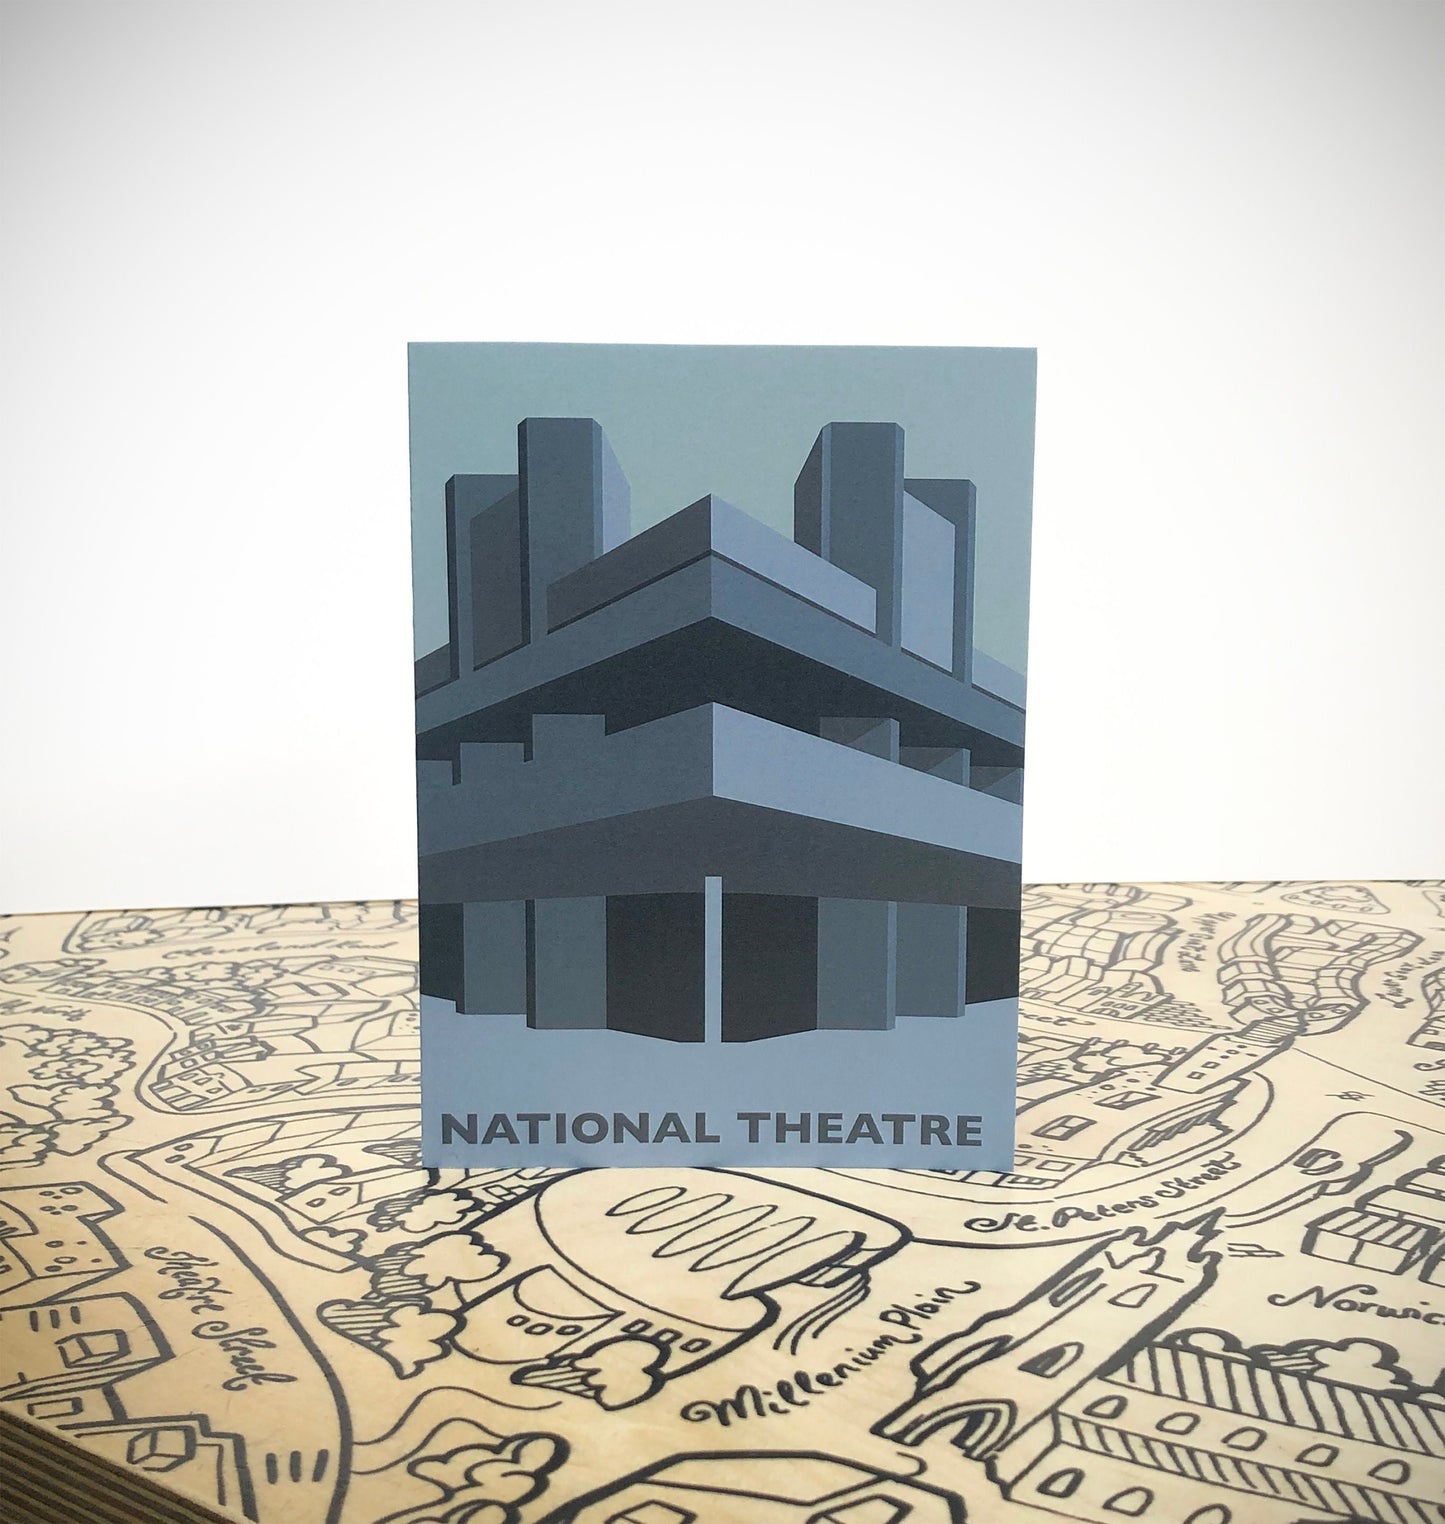 NATIONAL THEATRE - London - Brutalism / Brutalist - Travel Poster Style Greetings Card by Rebecca Pymar